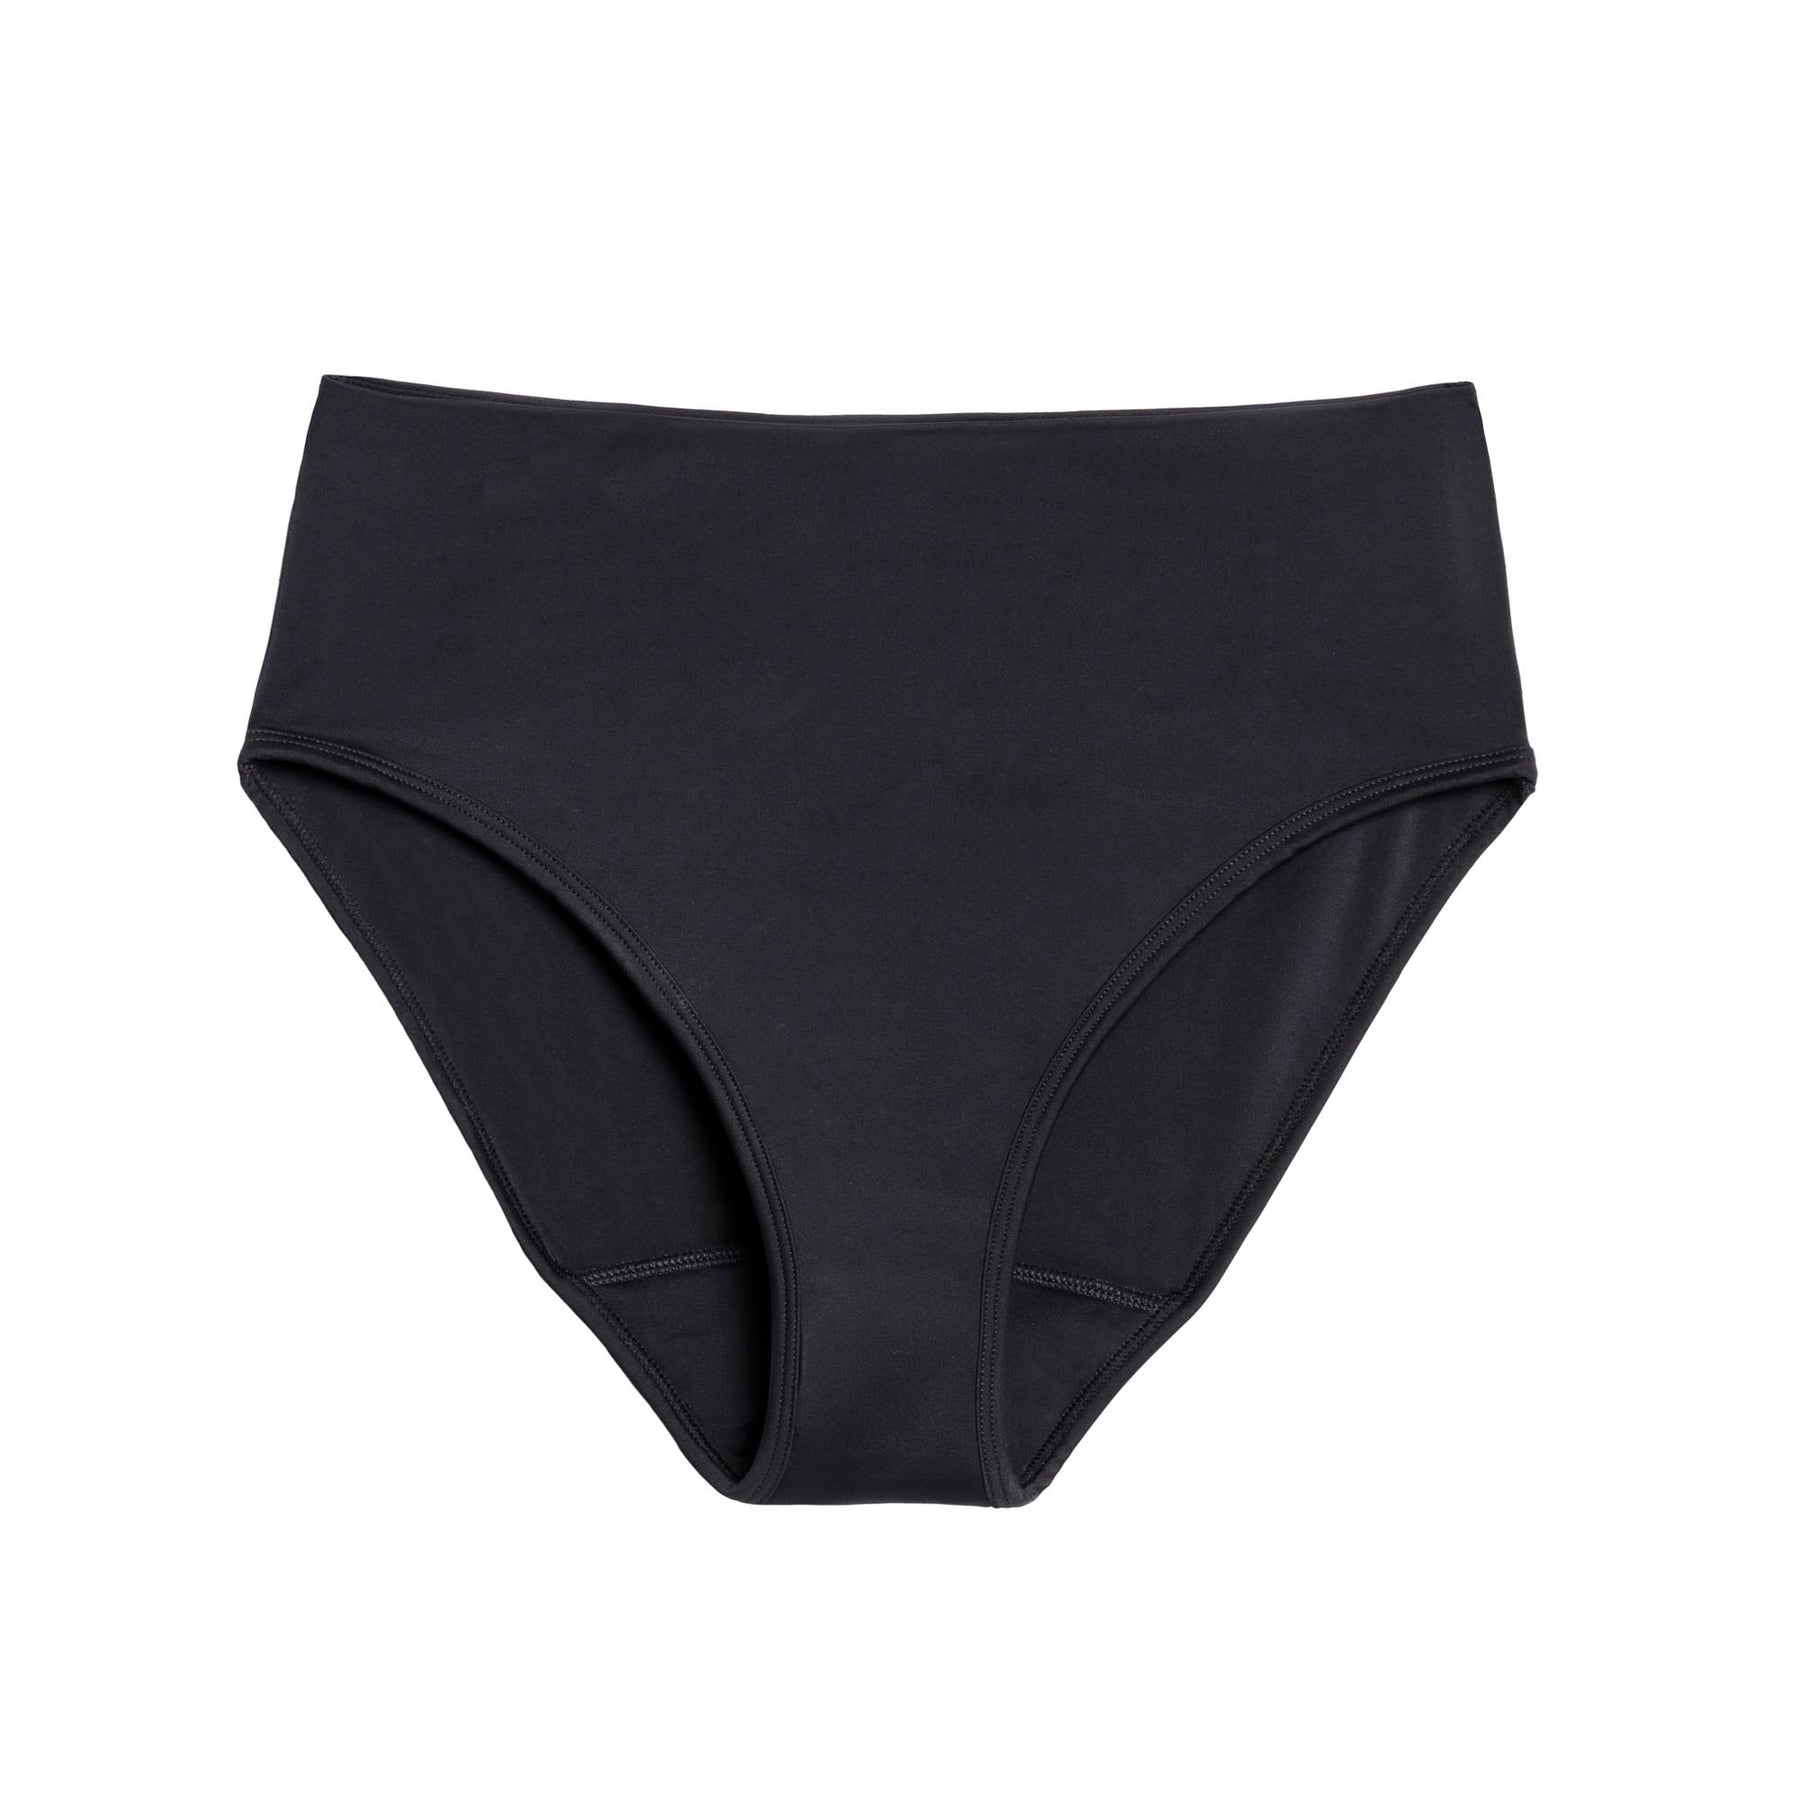 High Waisted Bikini Swim Bottoms For Women Stylish Period Bathing Suit  Bottoms And Shorts For Girls 1012 From Shizier, $16.85